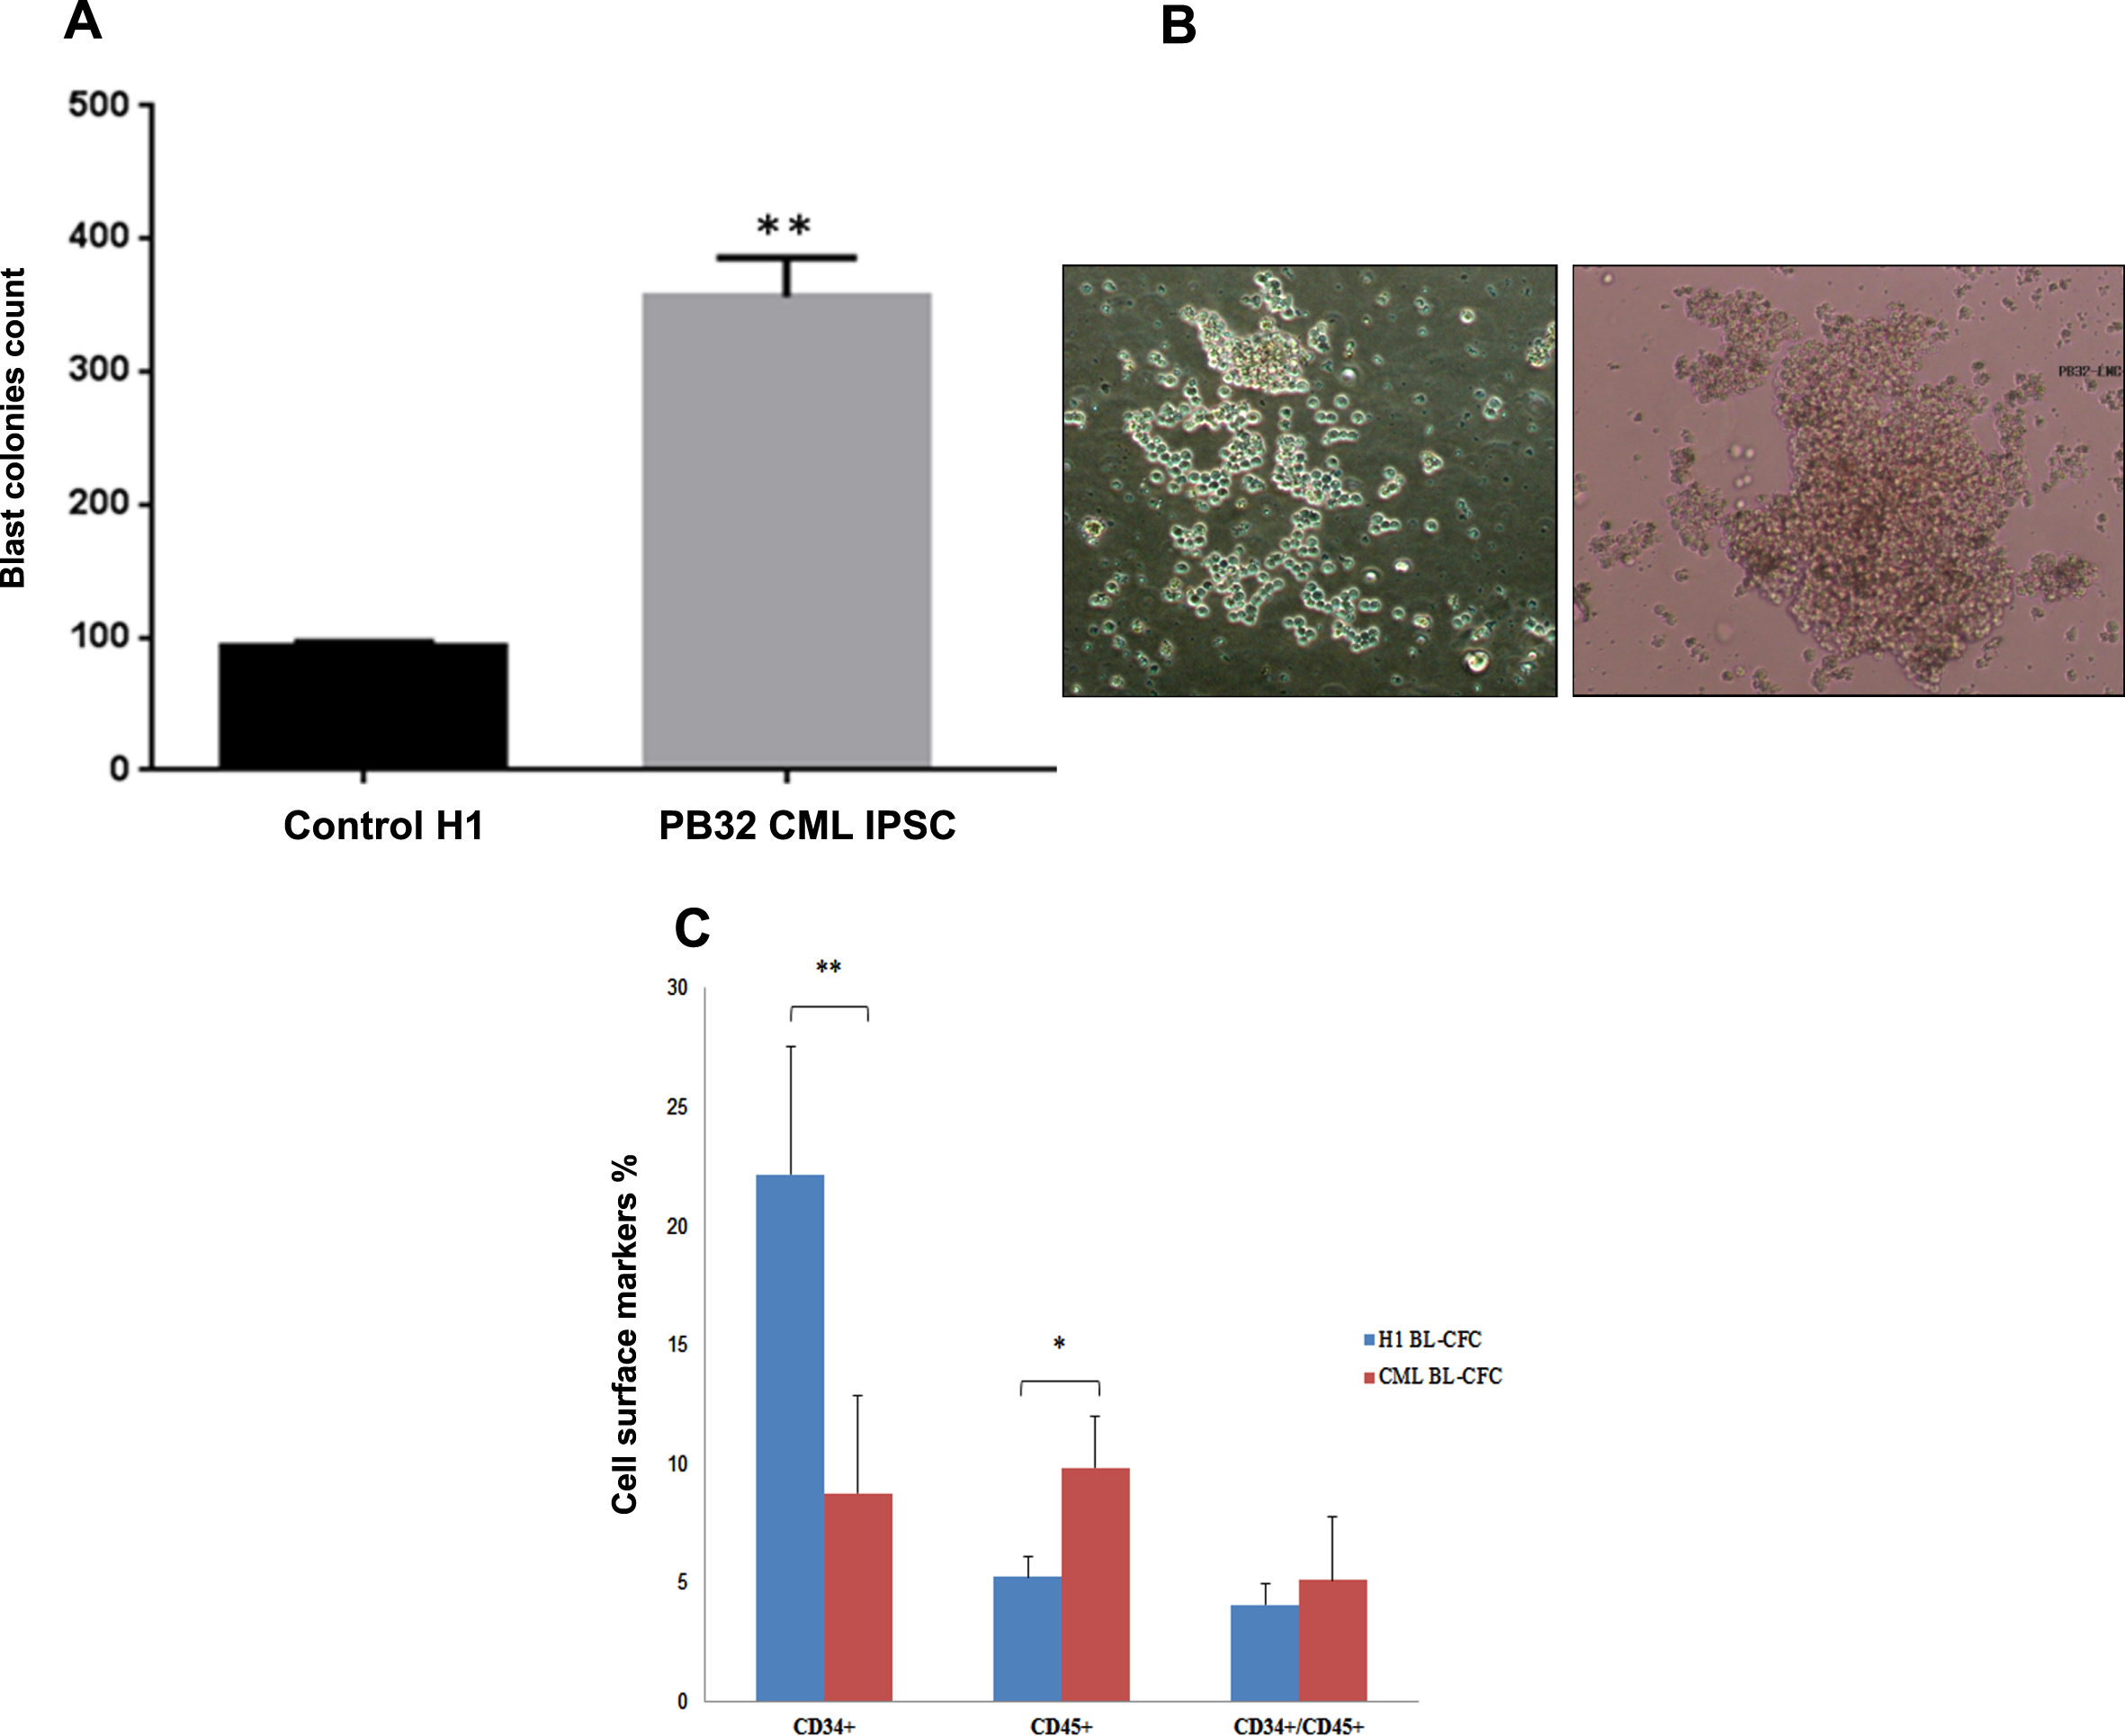 Impact of BCR-ABL expression in hematopoietic potential of CML IPS derived Bl-CFC. (A) Blast colony forming cells (Bl-CFC) derived from control embryonic stem cell line H1 and PB32 CML iPSC. (B) Representative photos of Bl-CFC. (C) Flow cytometry analysis of hematopoietic markers CD34 and CD45 in Bl-CFC derived from control ESC (H1) and PB32 CML iPSC.